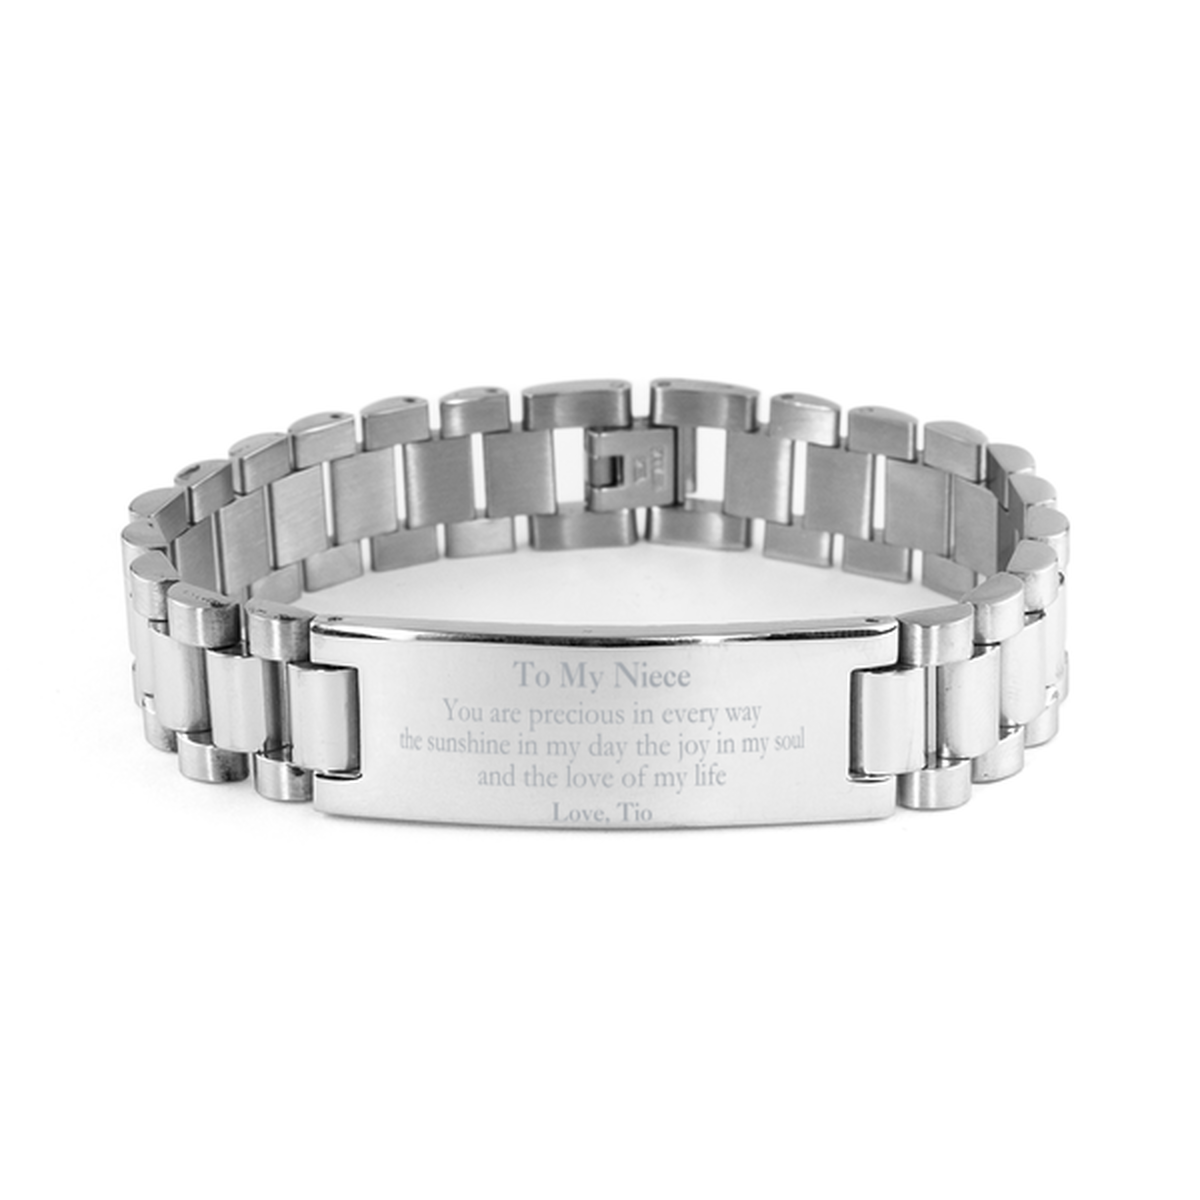 Graduation Gifts for Niece Ladder Stainless Steel Bracelet Present from Tio, Christmas Niece Birthday Gifts Niece You are precious in every way the sunshine in my day. Love, Tio